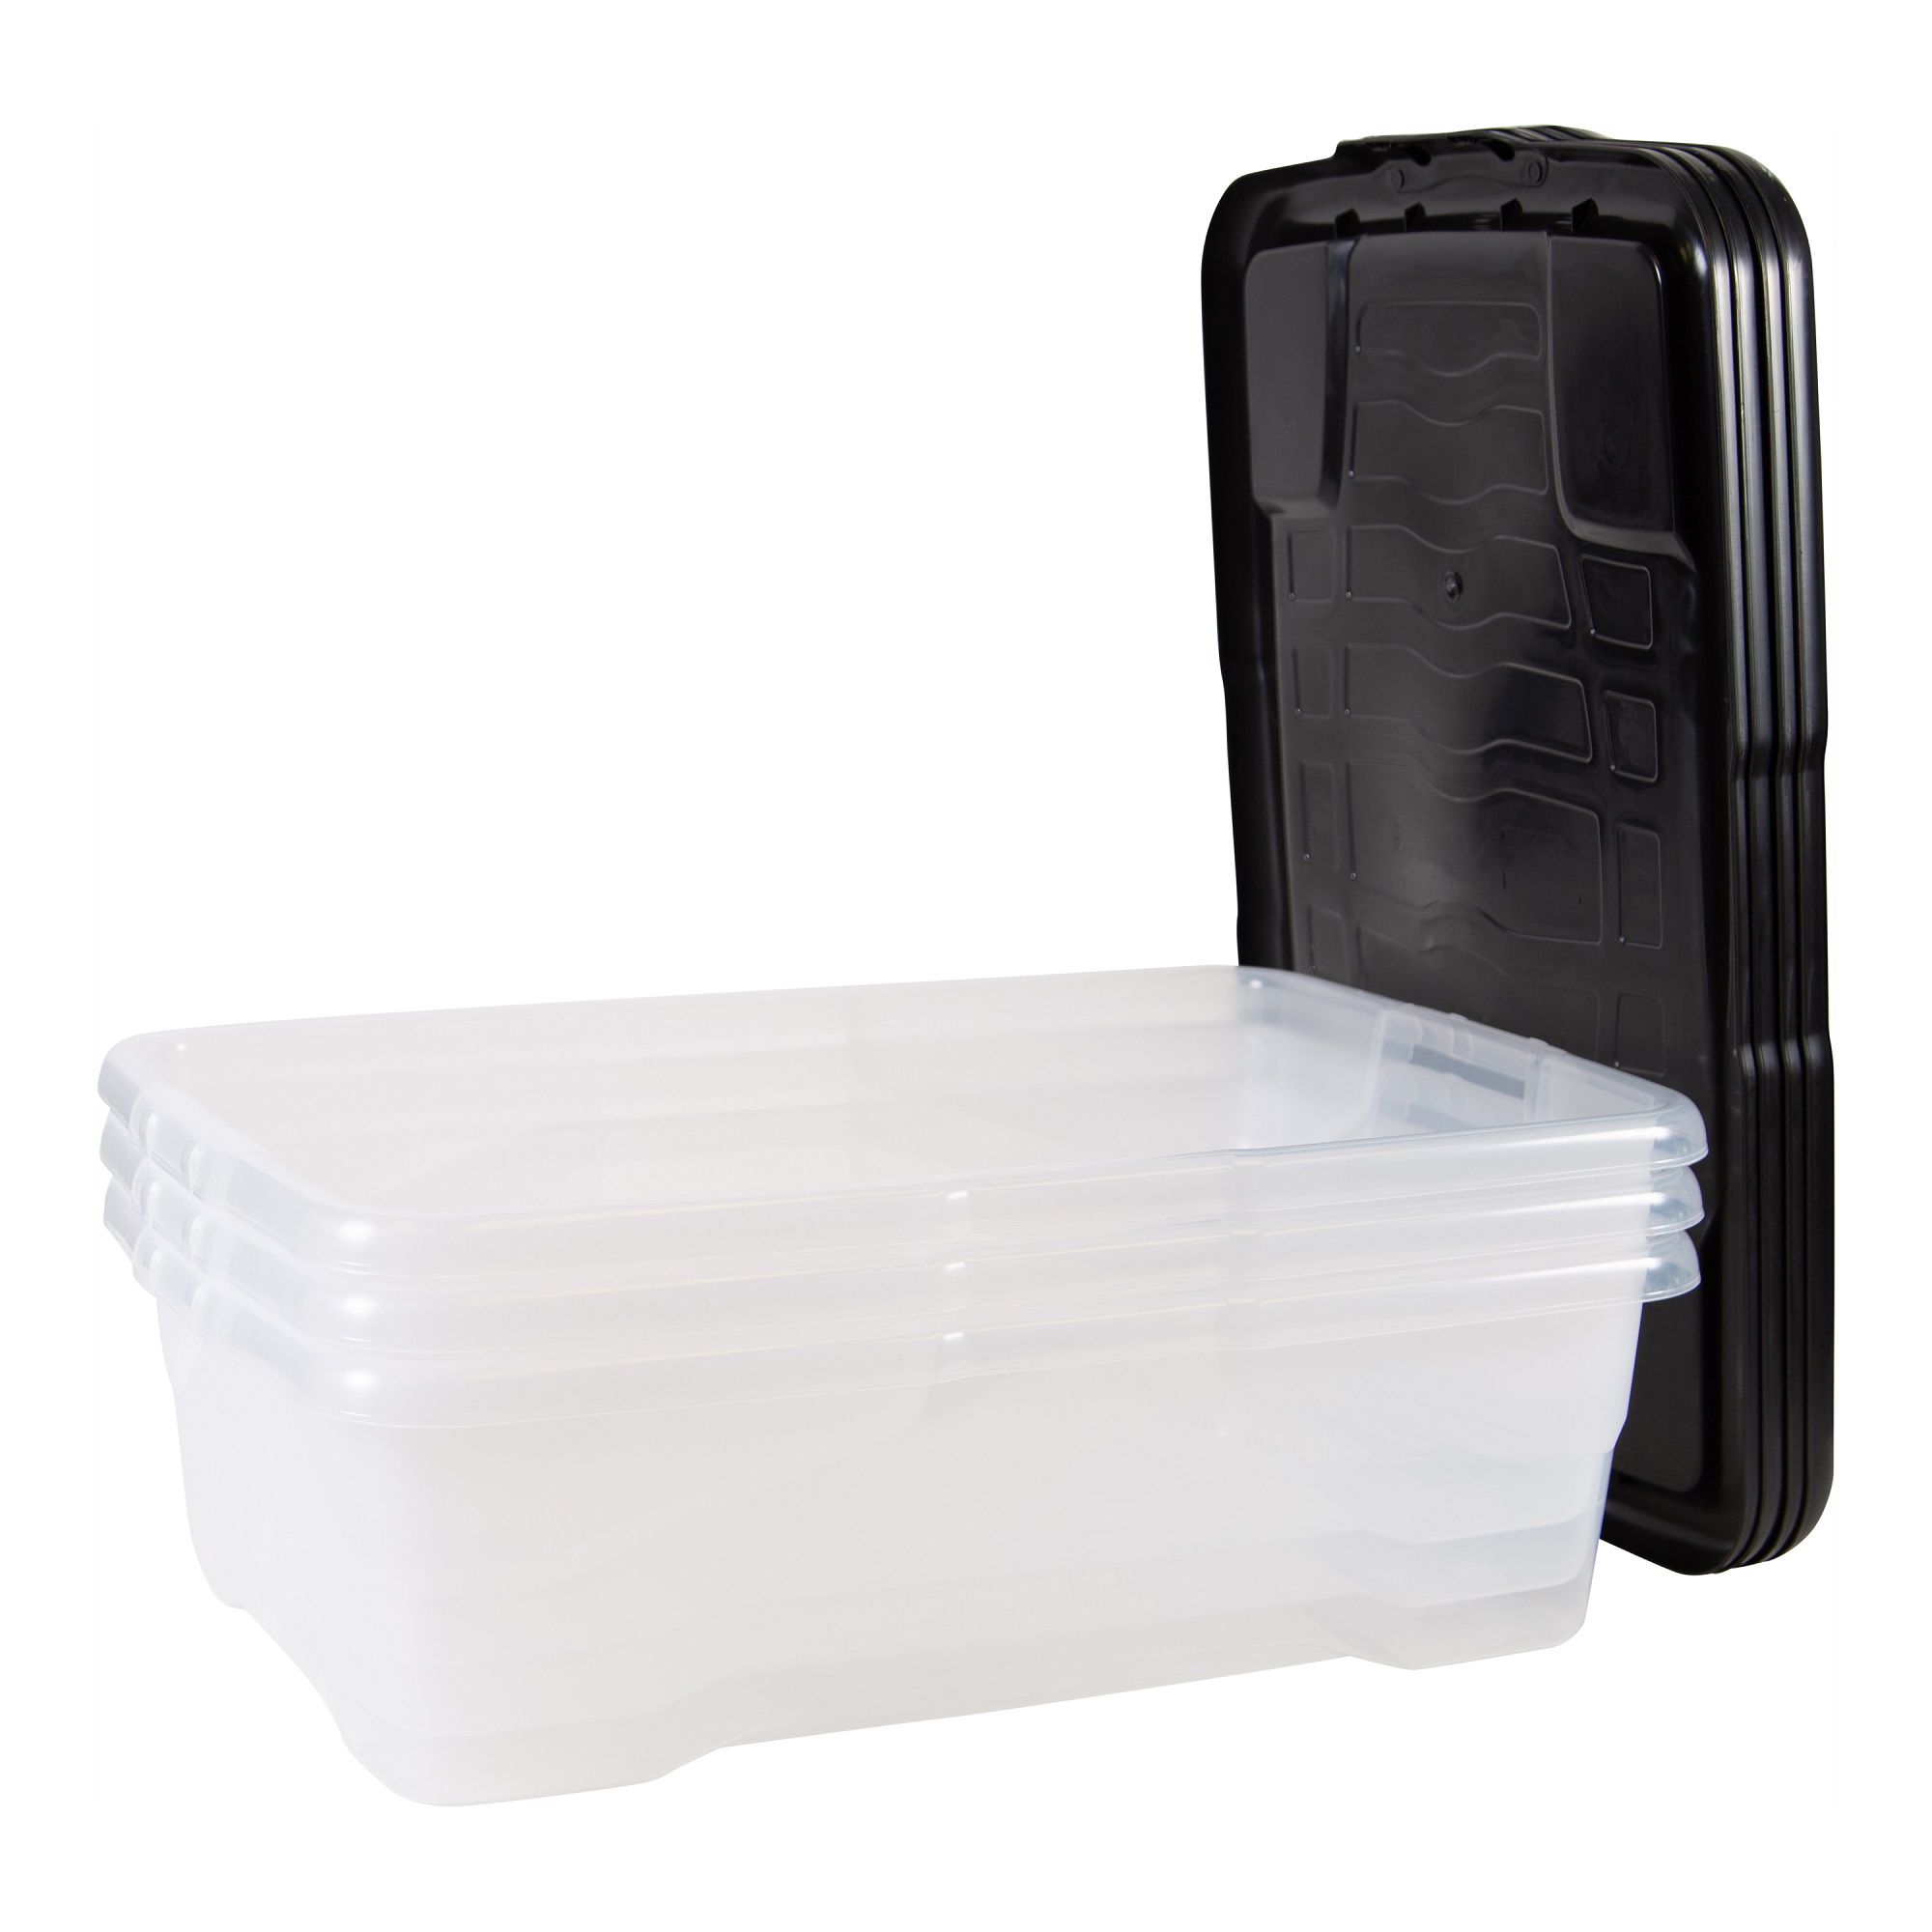 https://media.diy.com/is/image/Kingfisher/strata-curve-clear-black-30l-small-stackable-storage-box-with-lid-pack-of-3~5021711053234_04c_bq?$MOB_PREV$&$width=618&$height=618